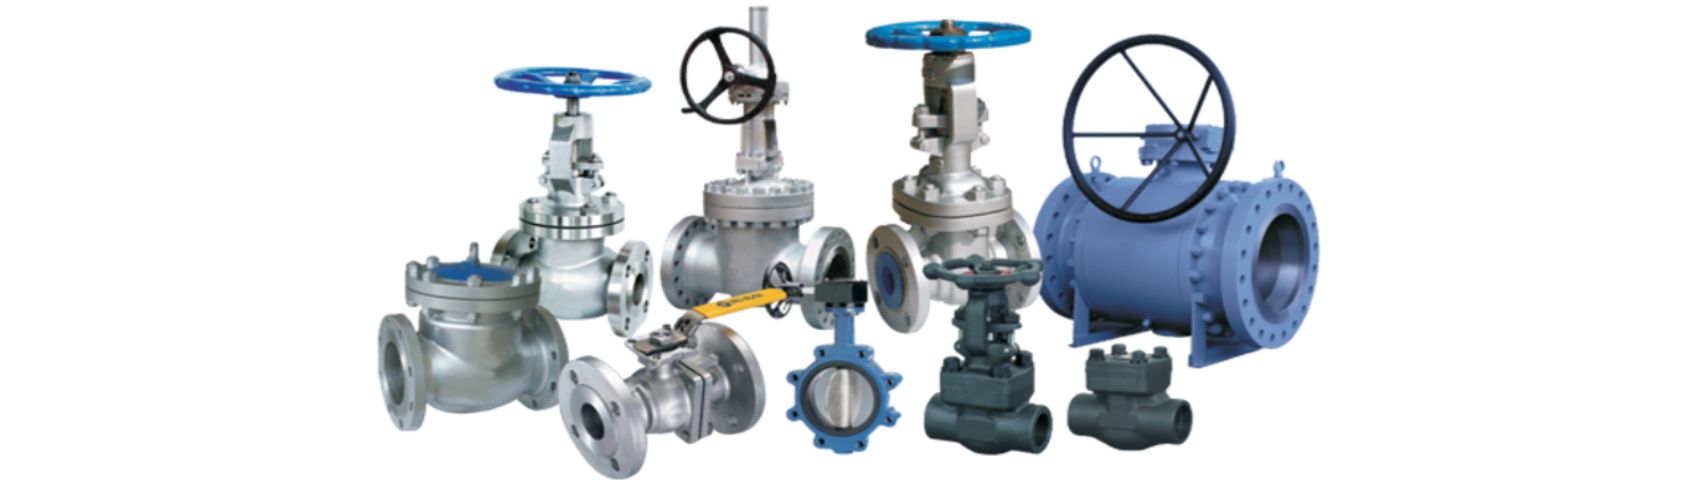 What Is Pressure Independent Balancing Valve?